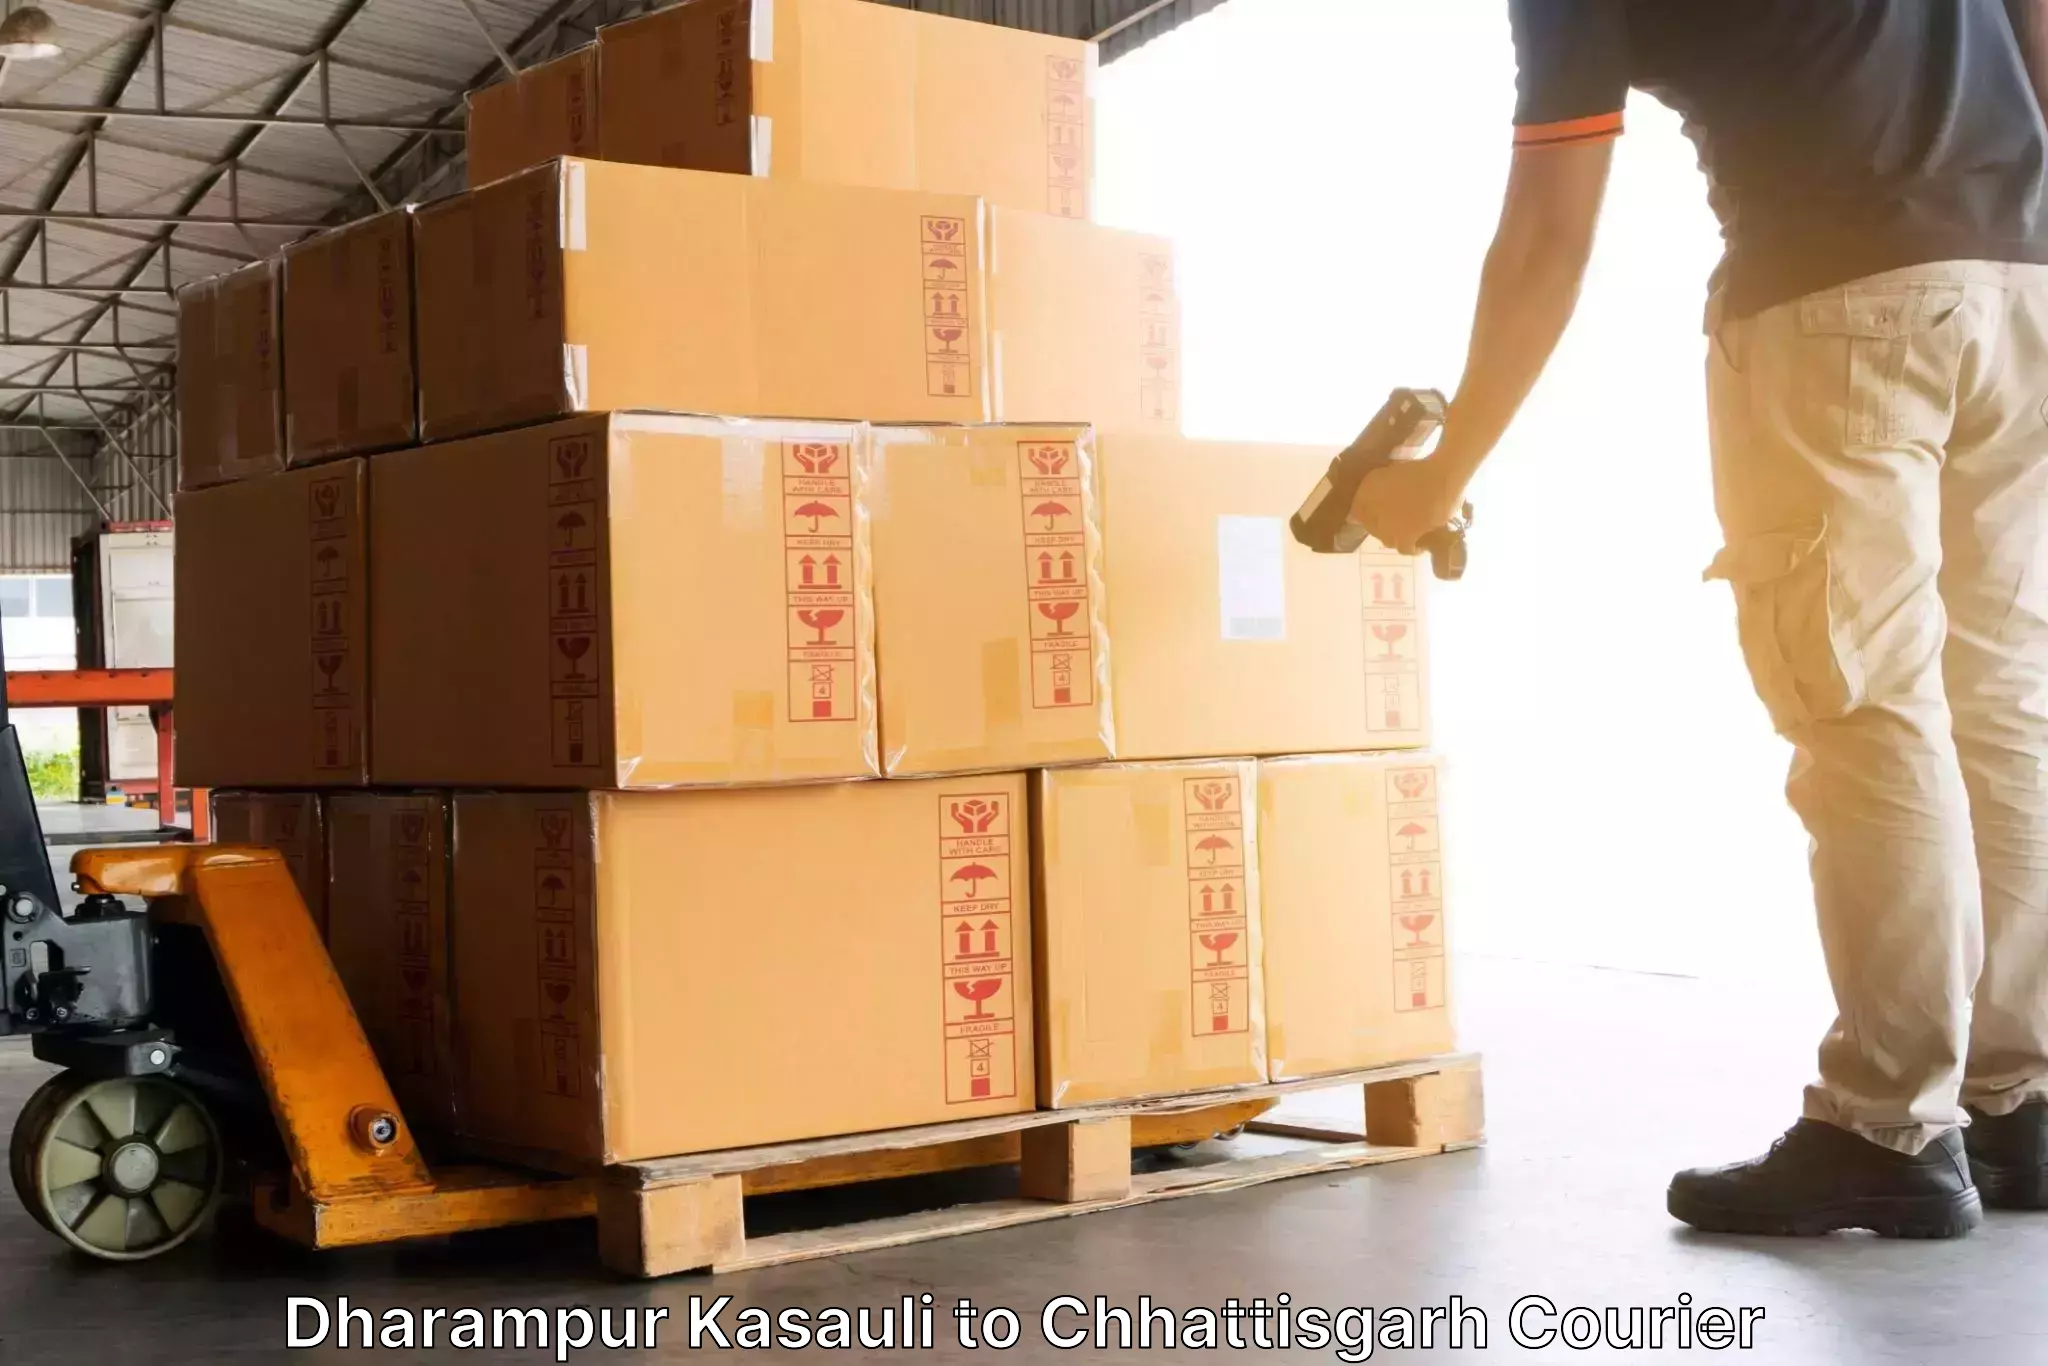 Express logistics service in Dharampur Kasauli to Dharamjaigarh